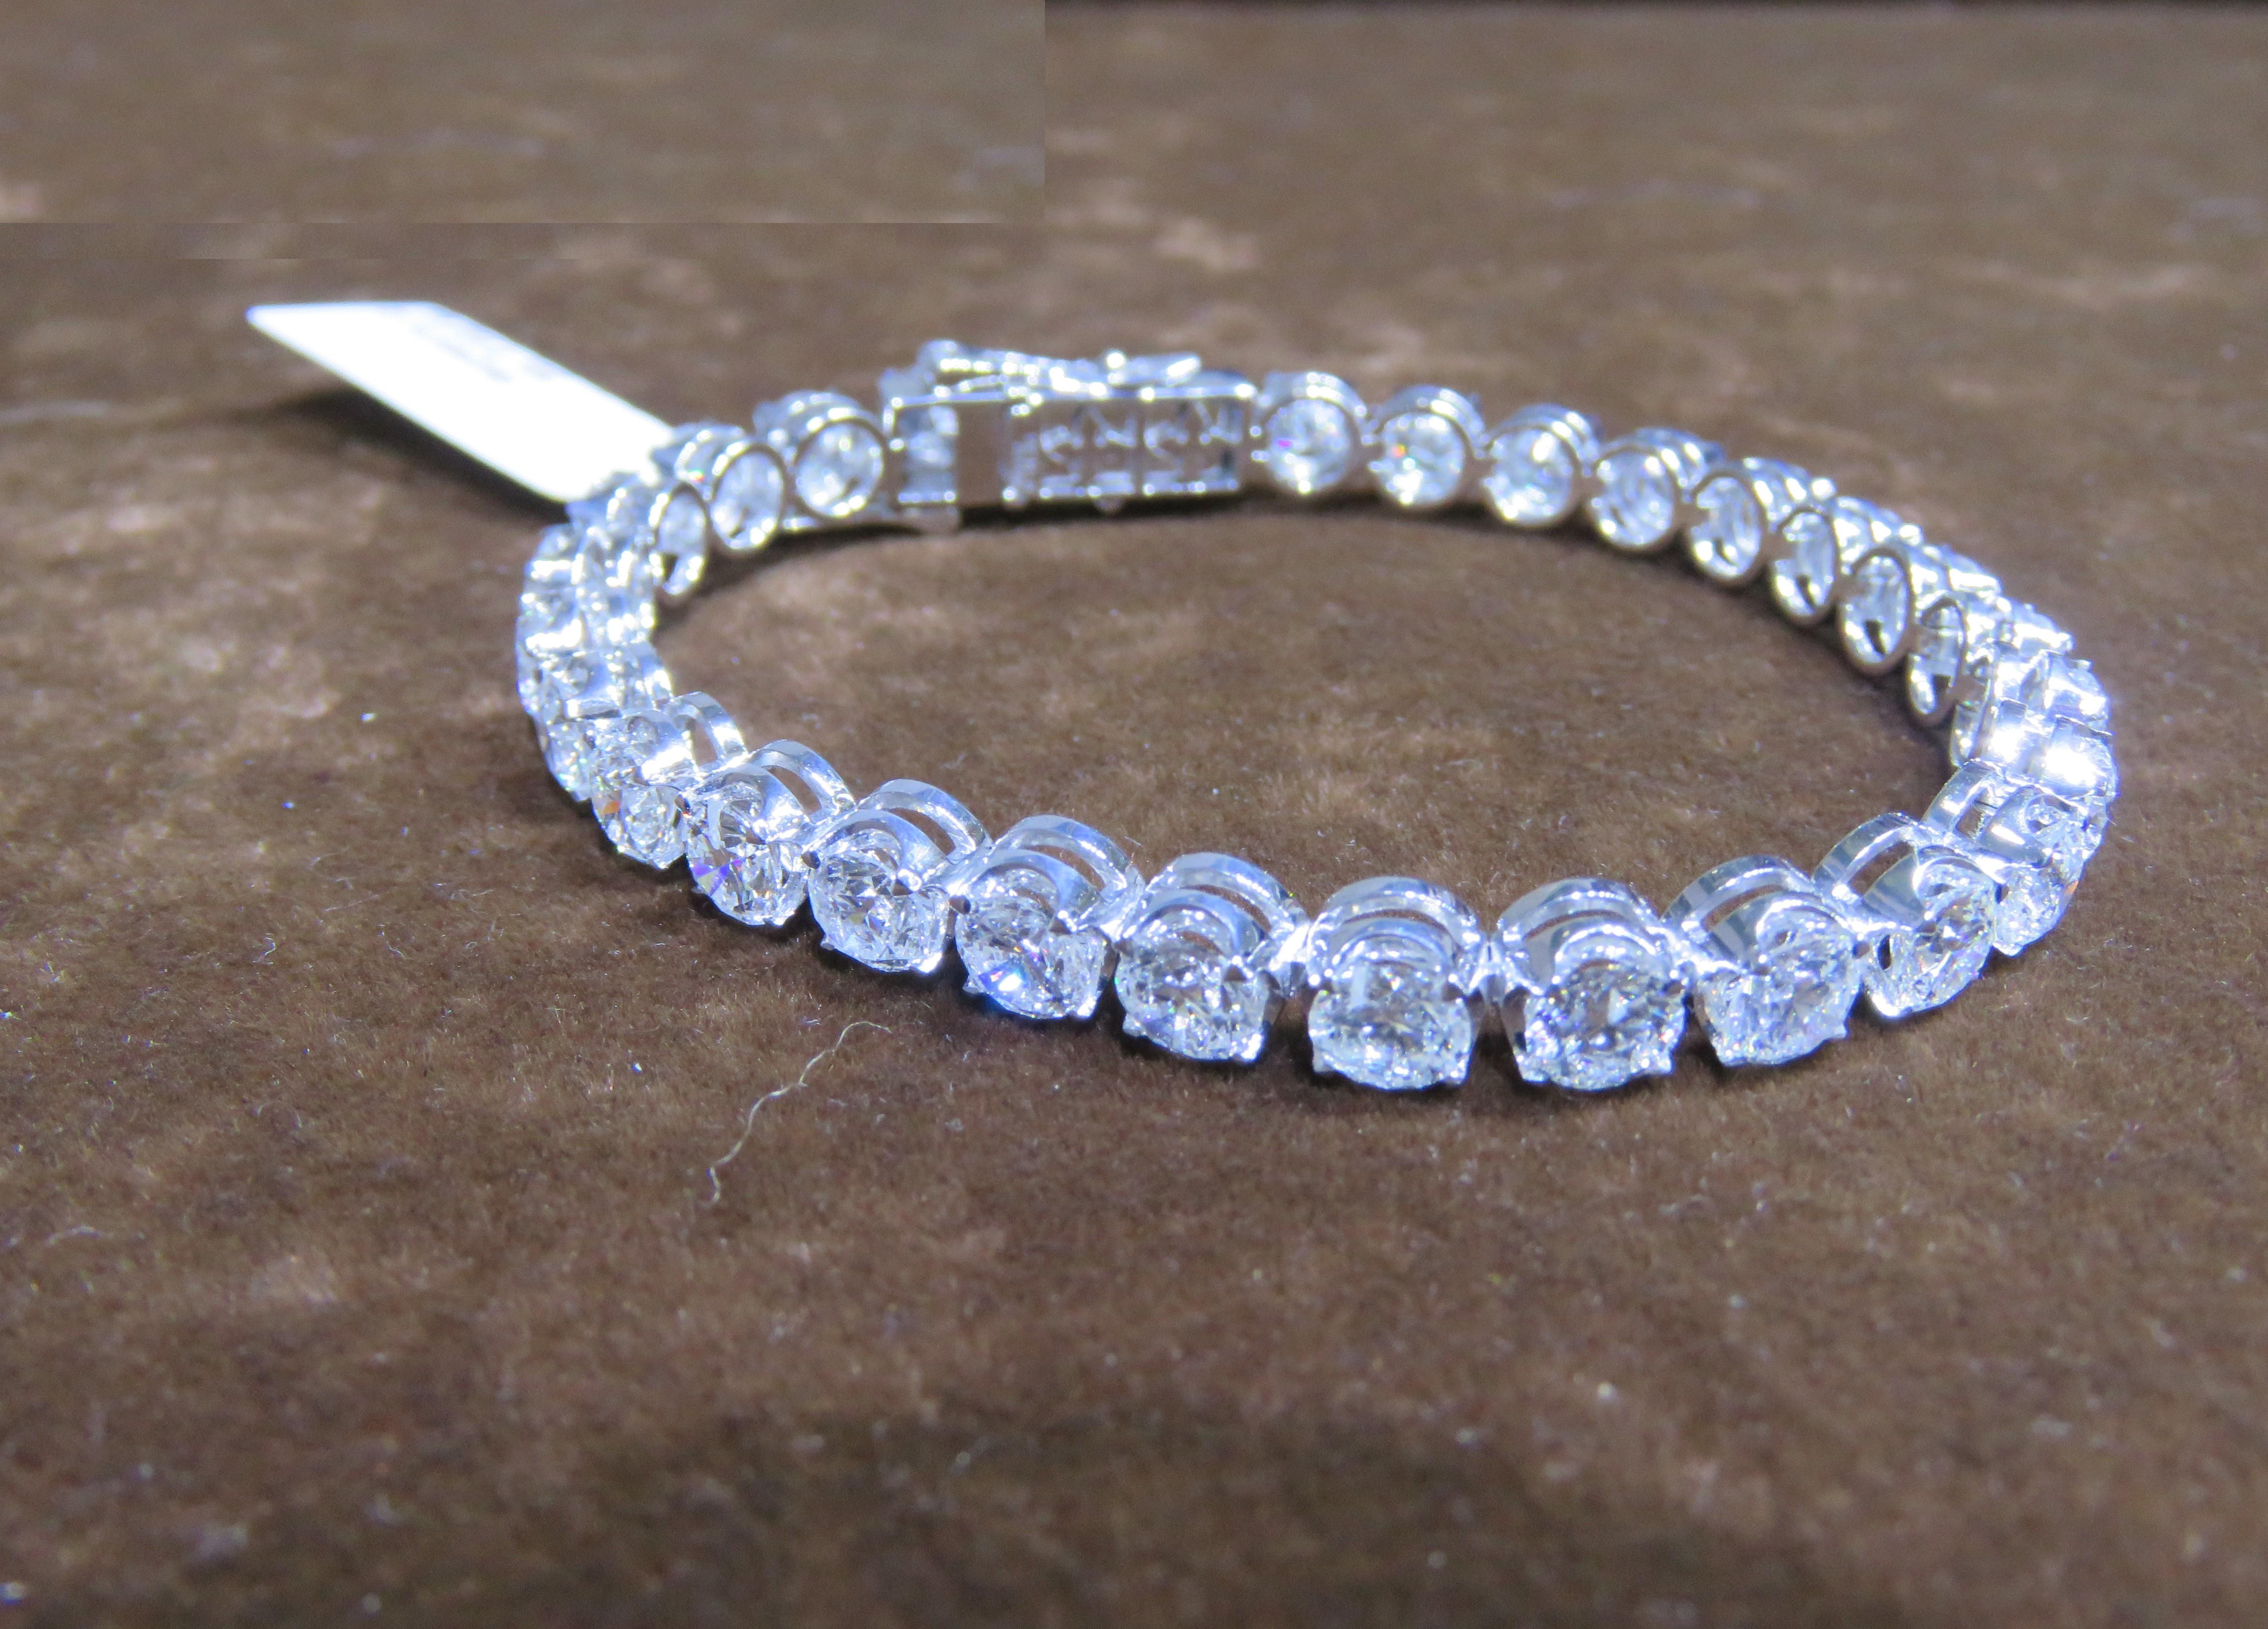 The Following Item we are offering is this Beautiful Rare Important 18KT White Gold Large Glittering Round Diamond Tennis Bracelet. Bracelet is comprised of over 25CTS Magnificent Rare Gorgeous Fancy Glittering Round Diamonds!!! The Diamonds are of